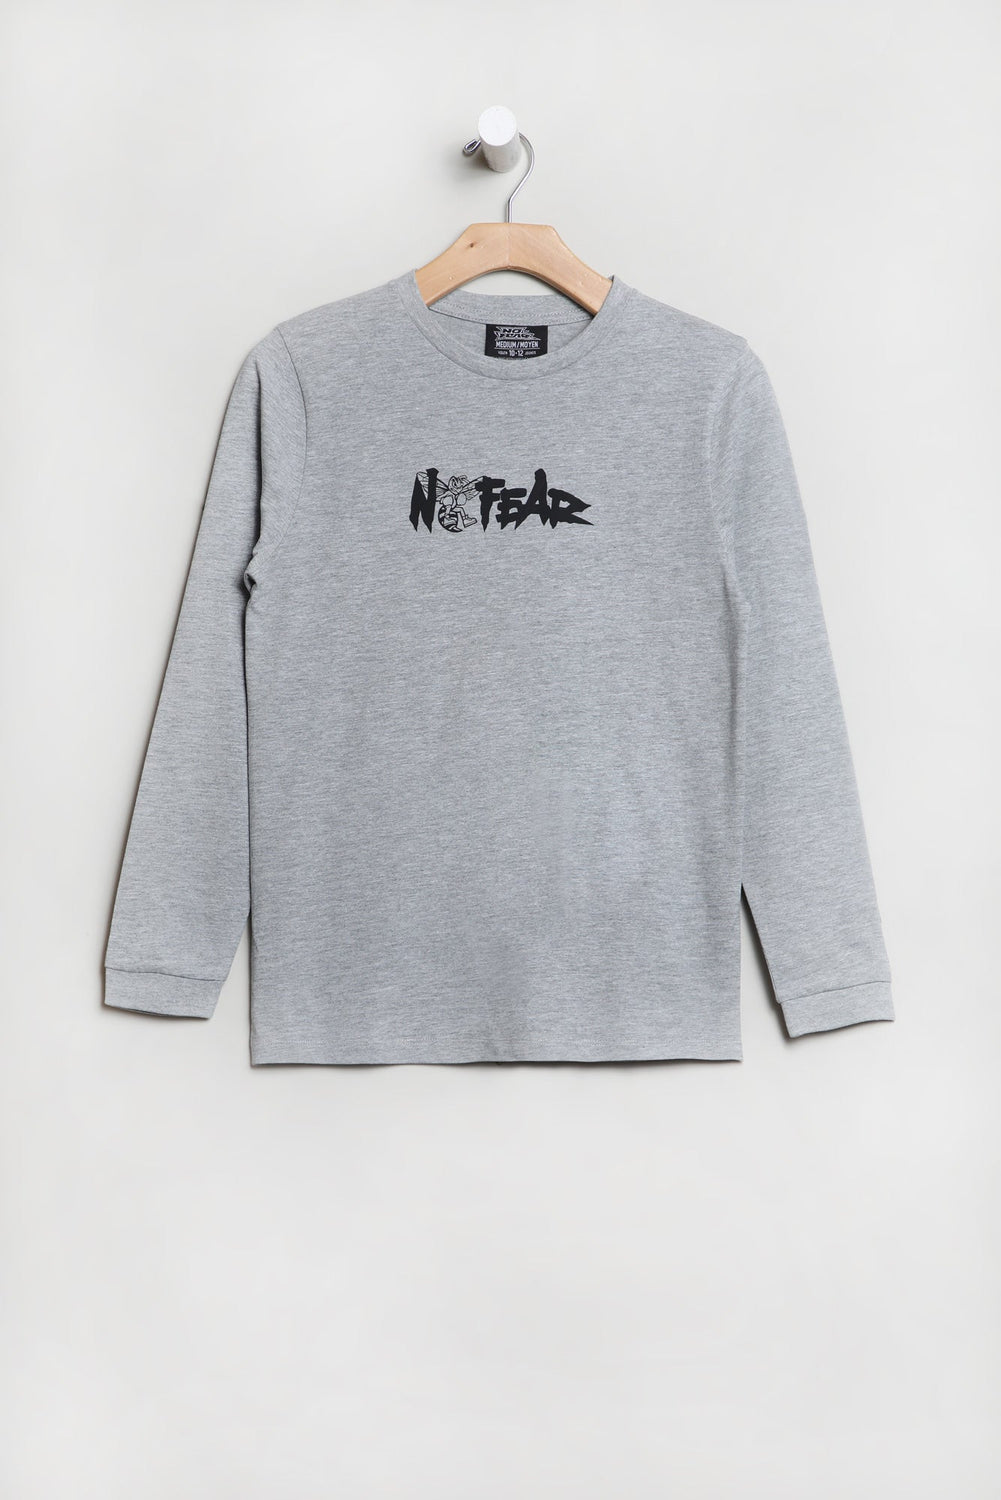 No Fear Youth Graphic Long Sleeve Top Heather Grey